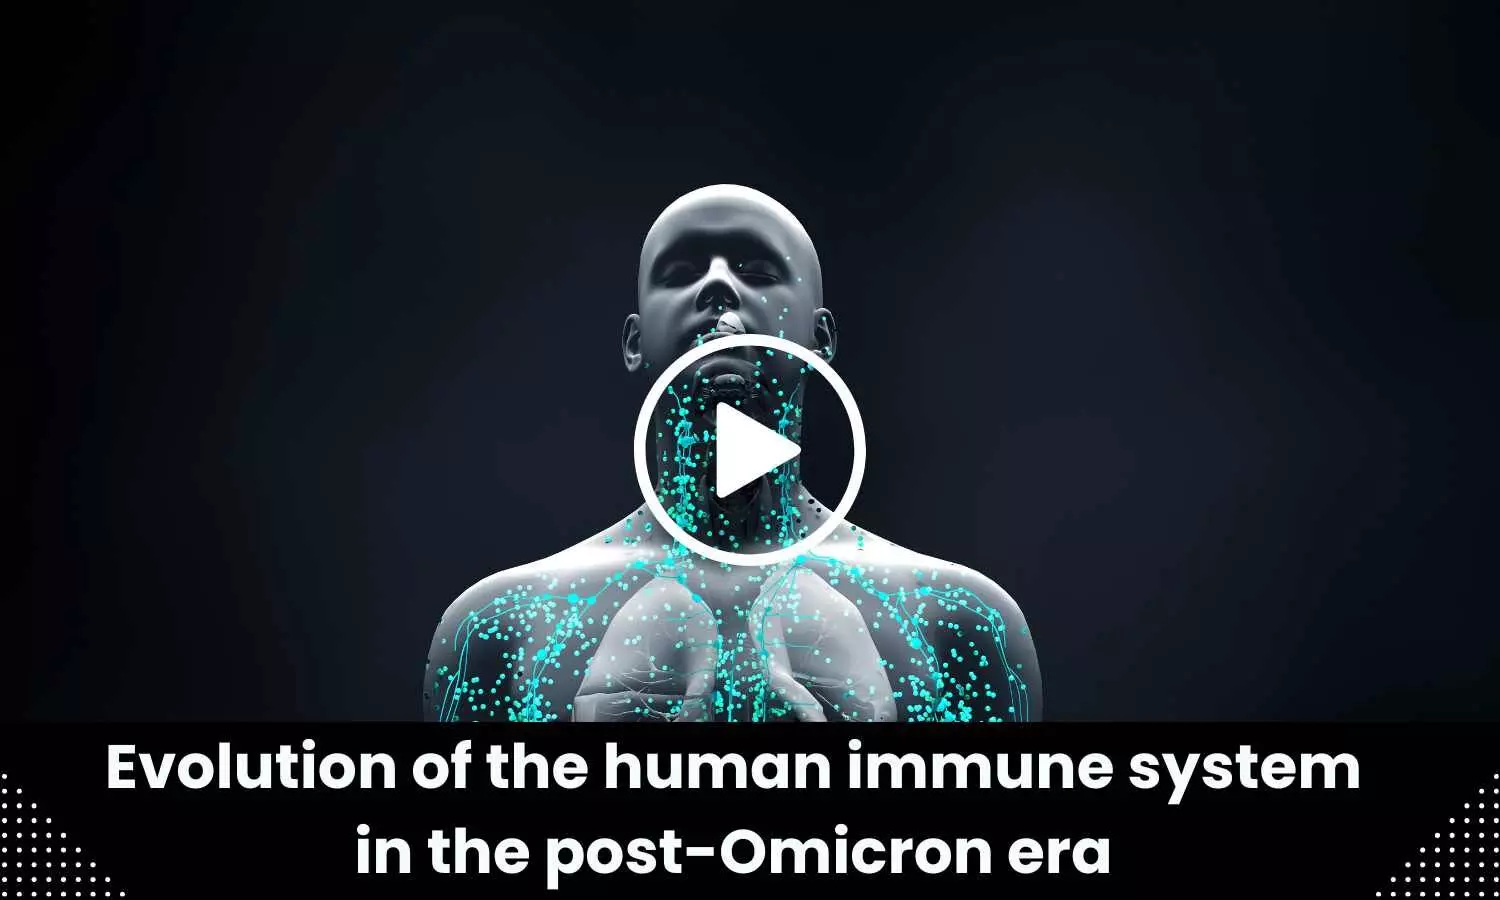 Evolution of the human immune system in the post-Omicron era